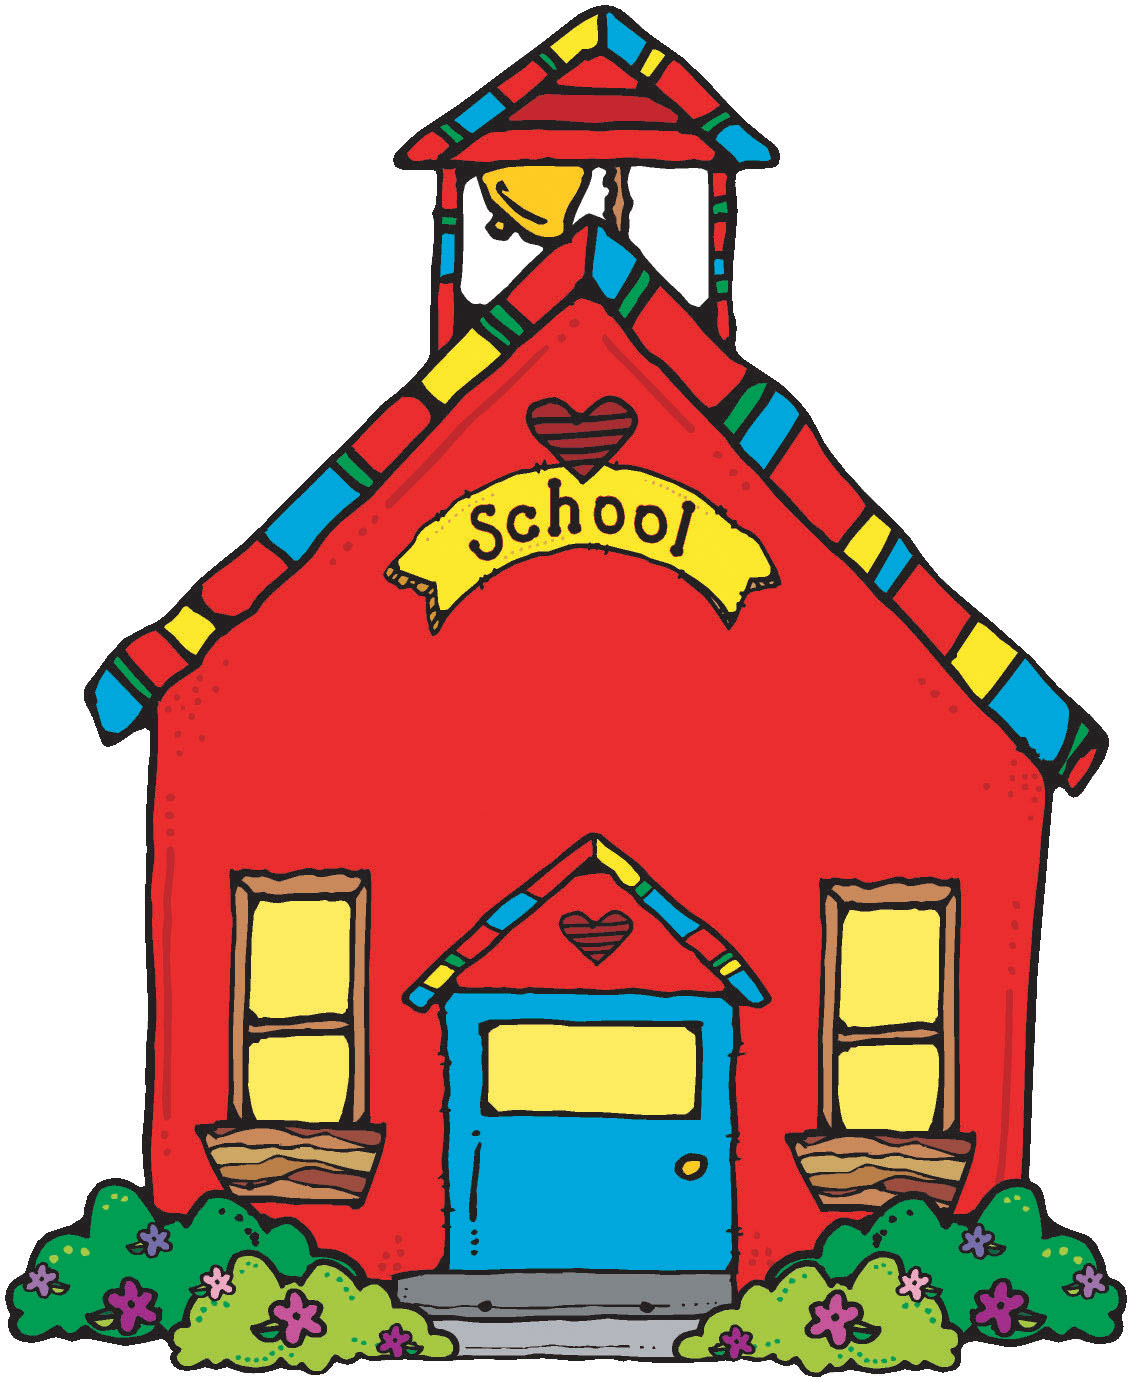 School house red schoolhouse clipart